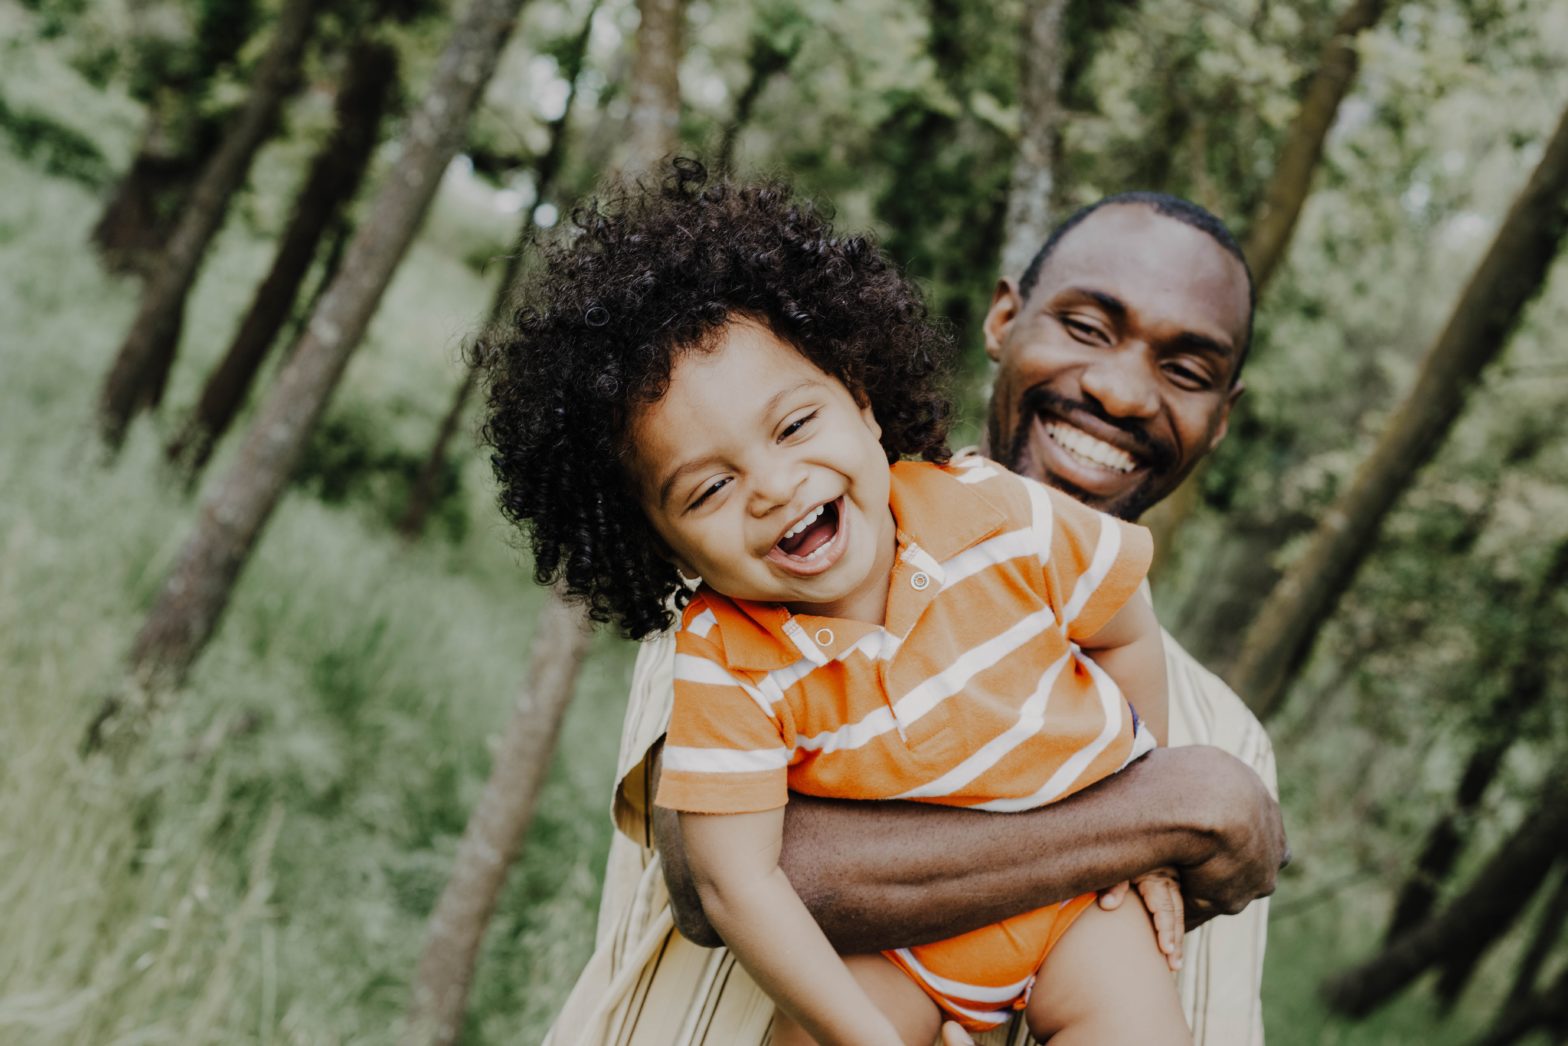 Happy Father's Day! Here Are Some Activities To Consider For Different Kinds Of Dads